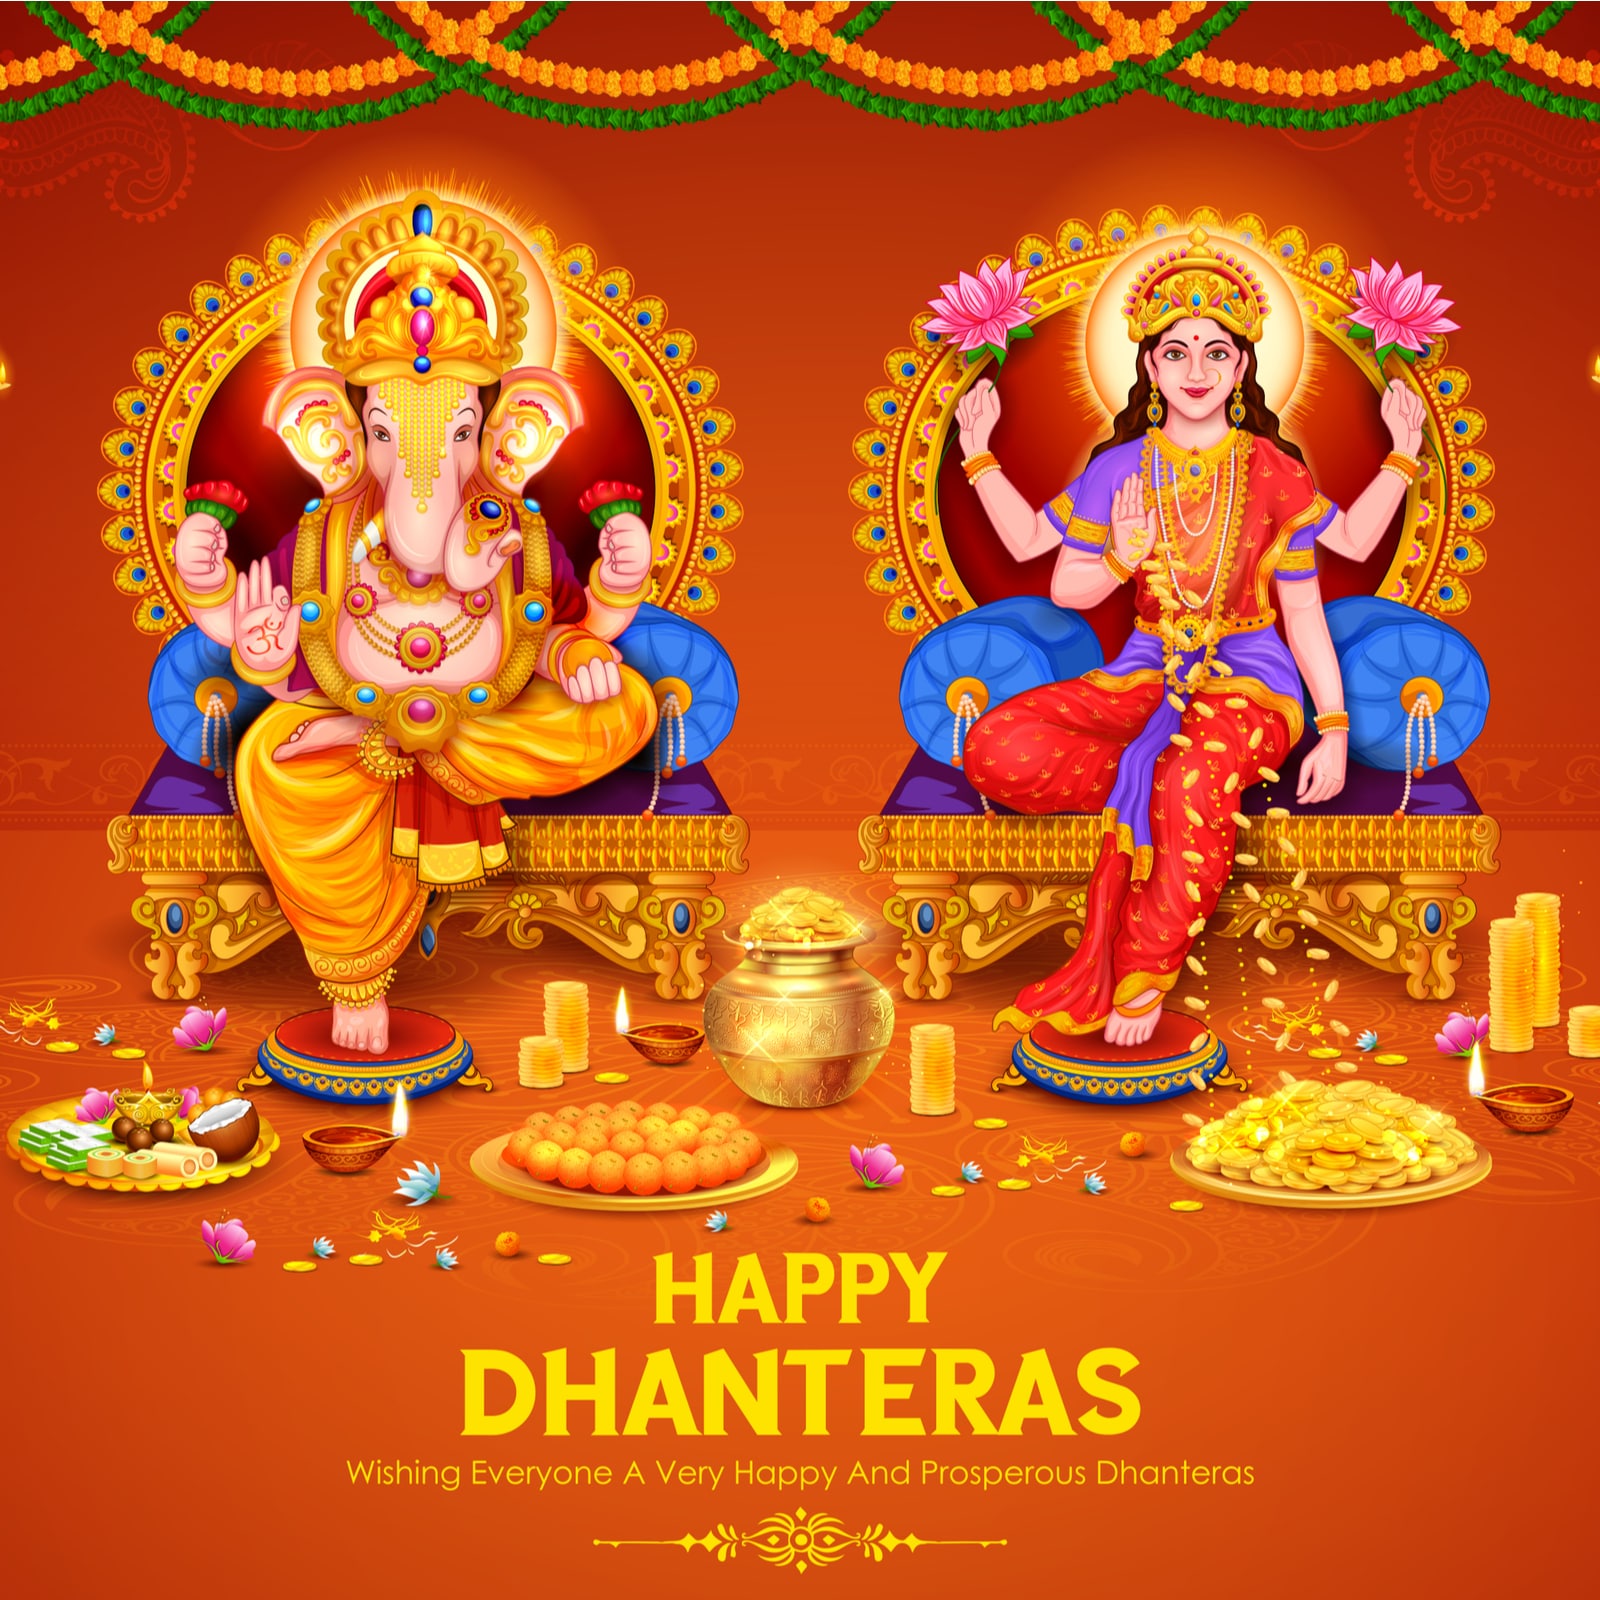 Happy Dhanteras 2022: Images, Wishes, Quotes, Messages and WhatsApp Greetings to Share. (Image: Shutterstock)